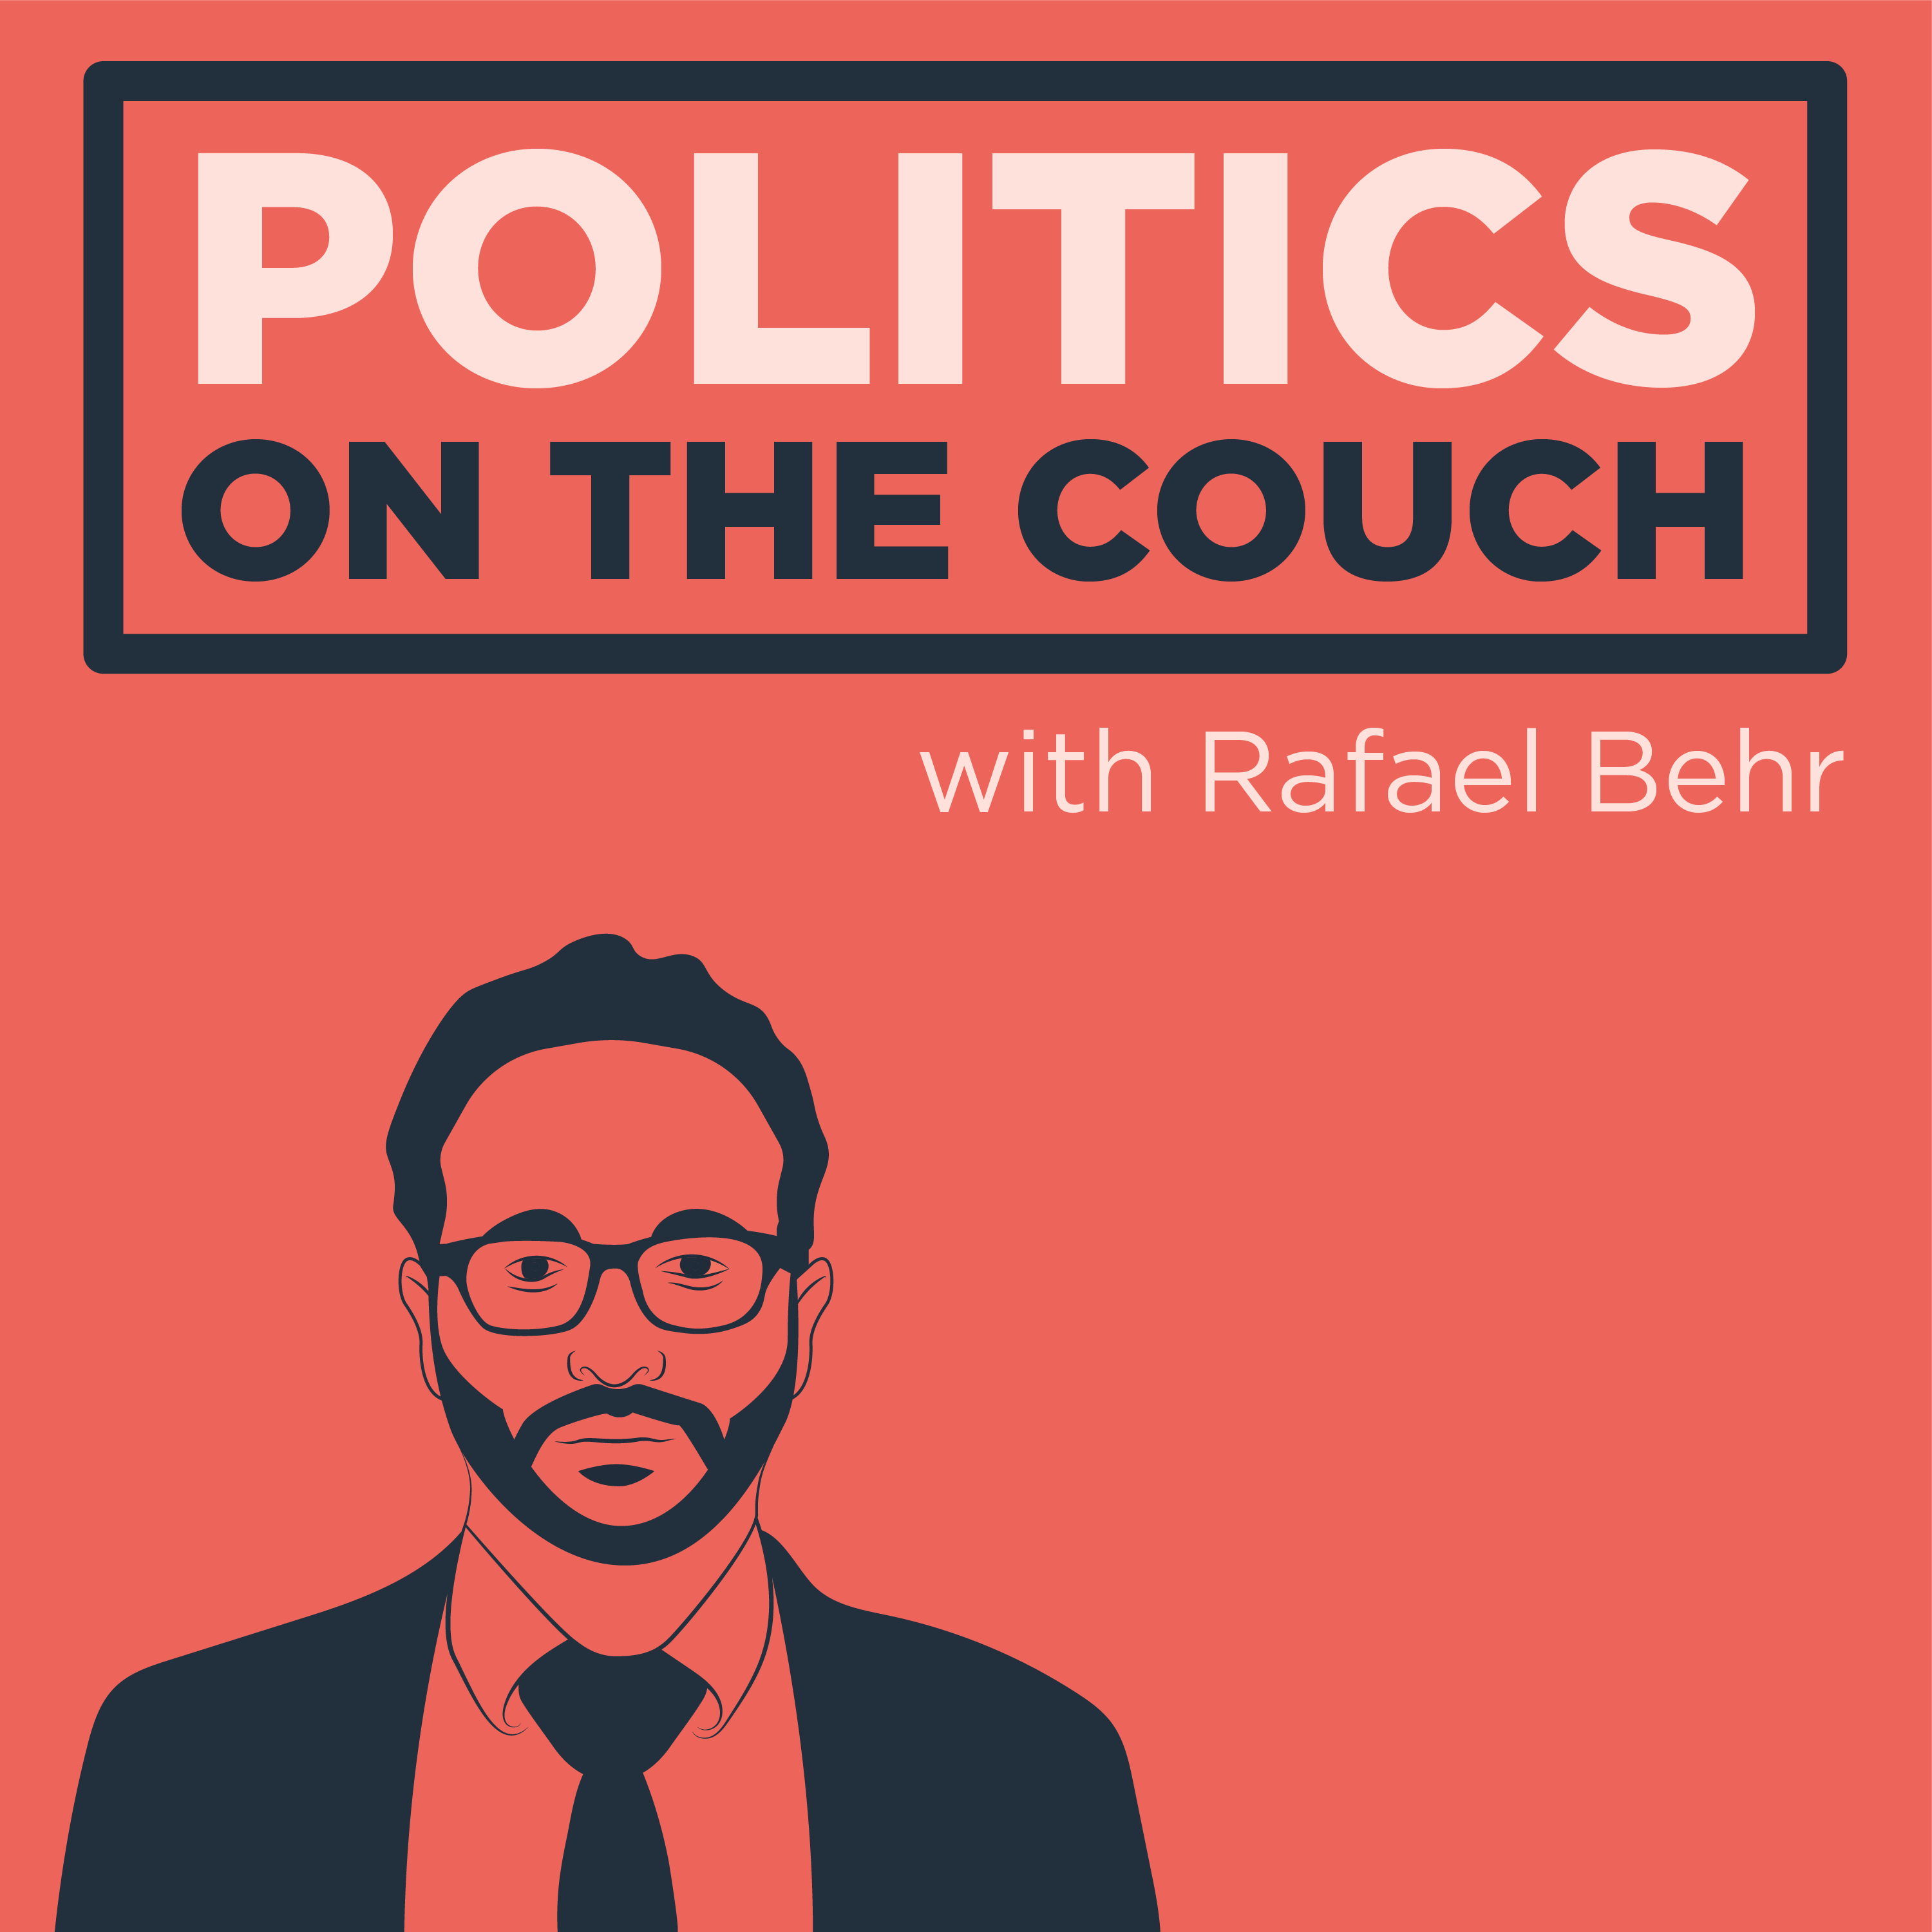 Politics on the Couch with Rafael Behr